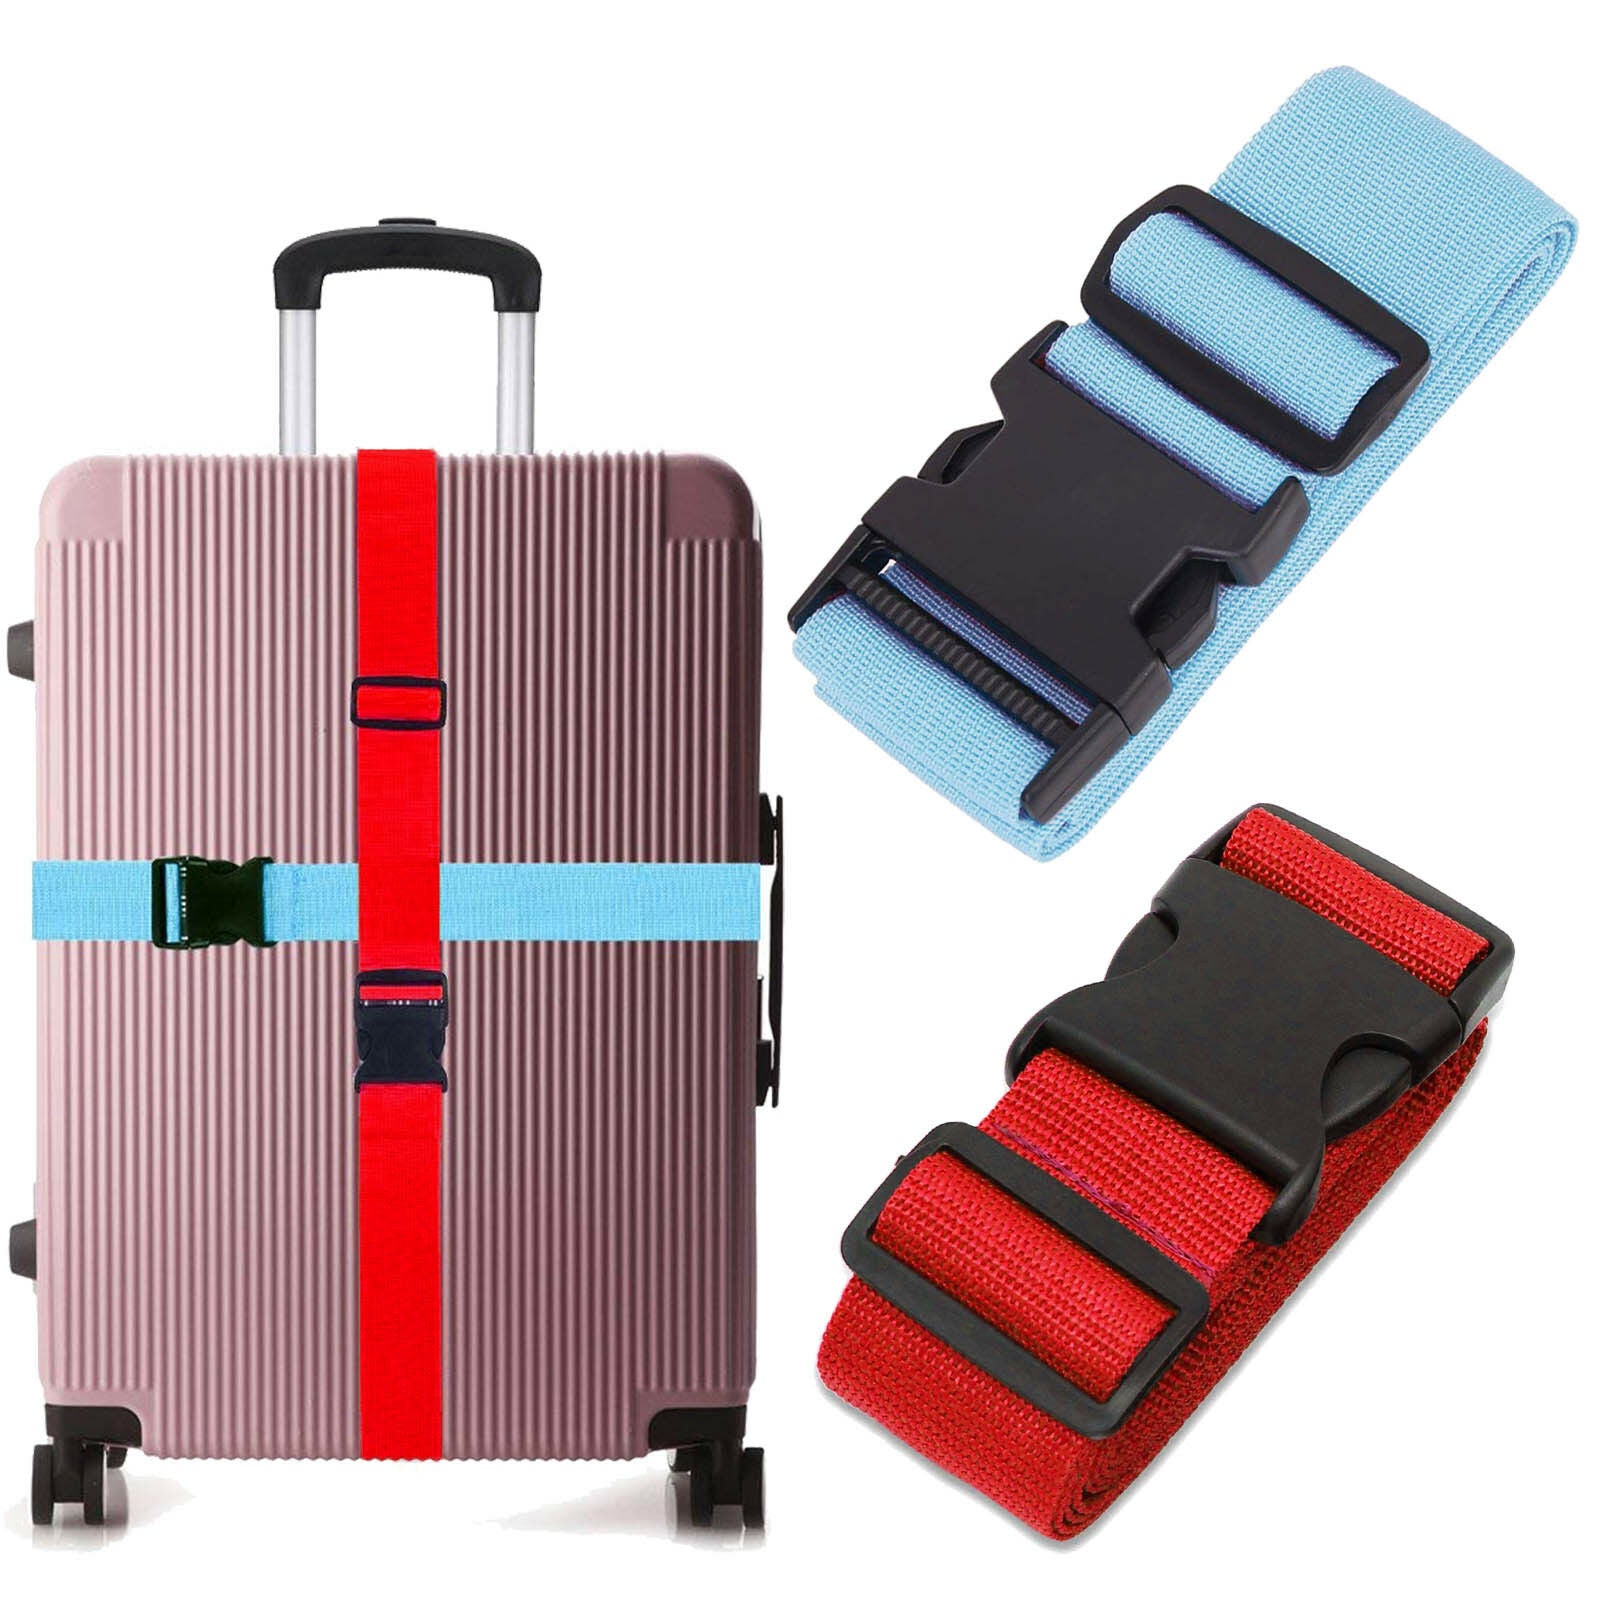 4 Pack Luggage Straps with 4 Pack Luggage Tags, Adjustable Suitcase Belts  with Quick Release Buckle, Non-Slip Security Belts & Suitcase Tags, Travel